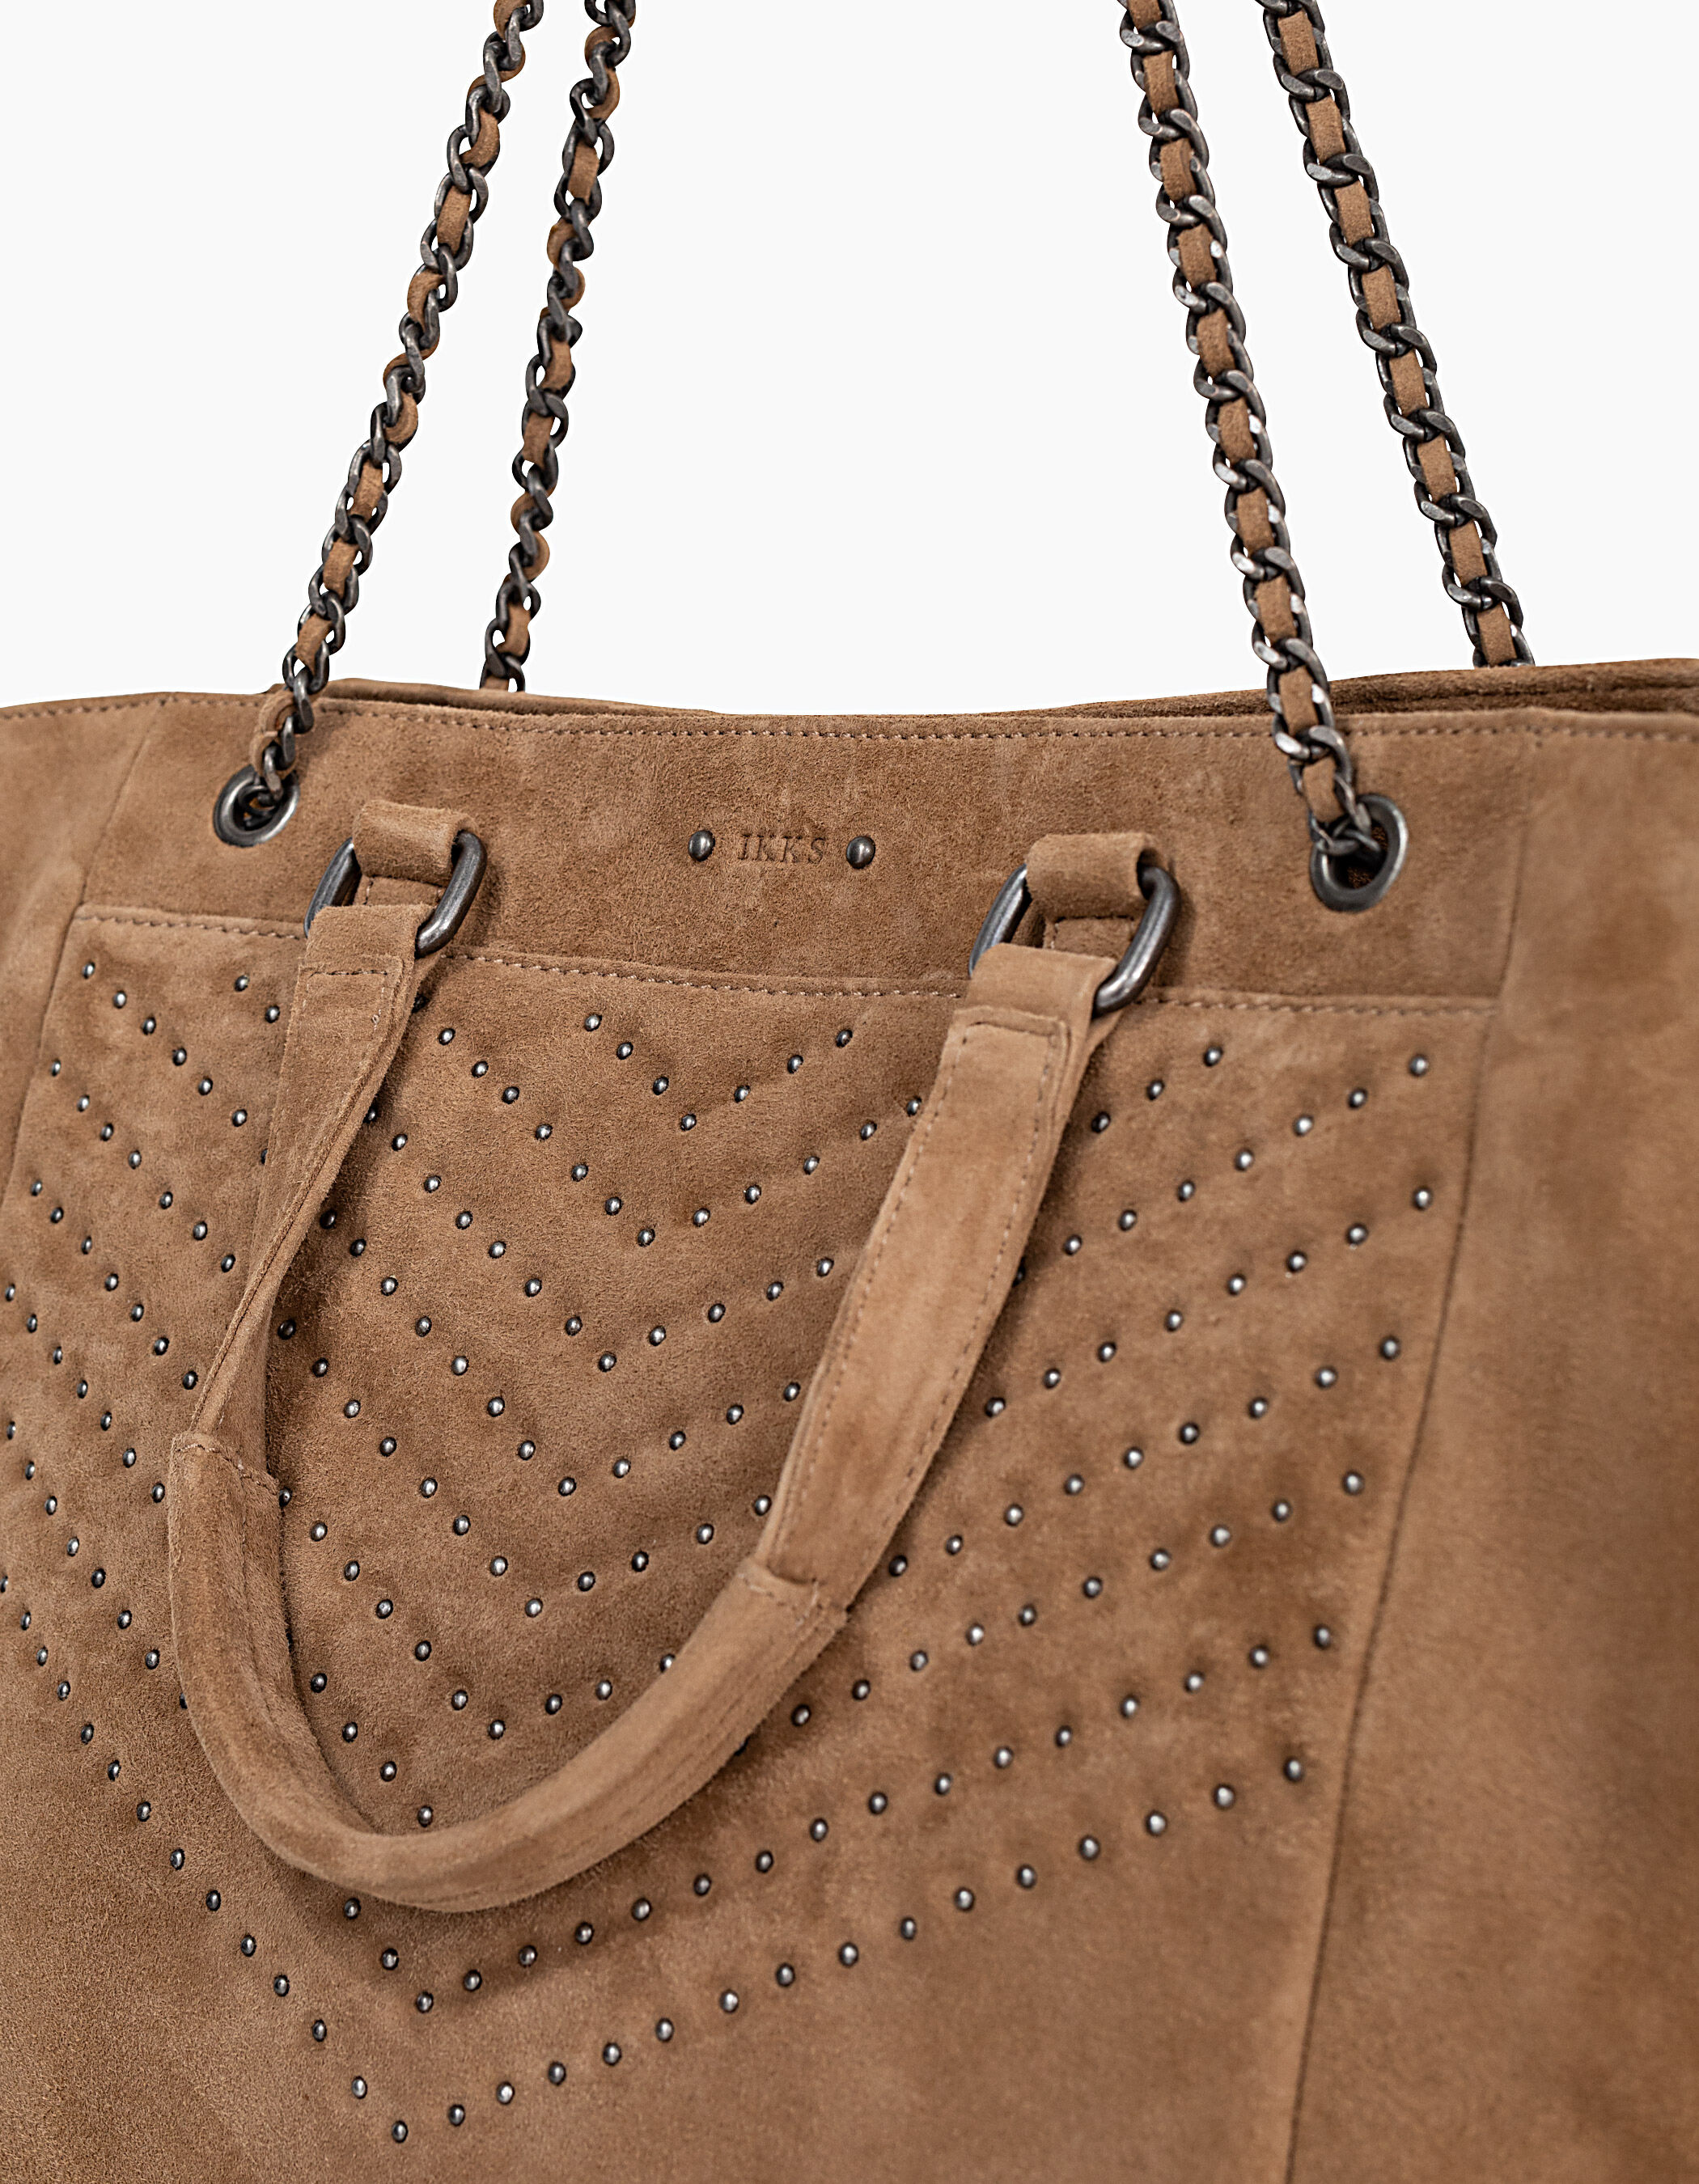 Women's THE SAND 1440 ROCK suede chevron quilted tote bag